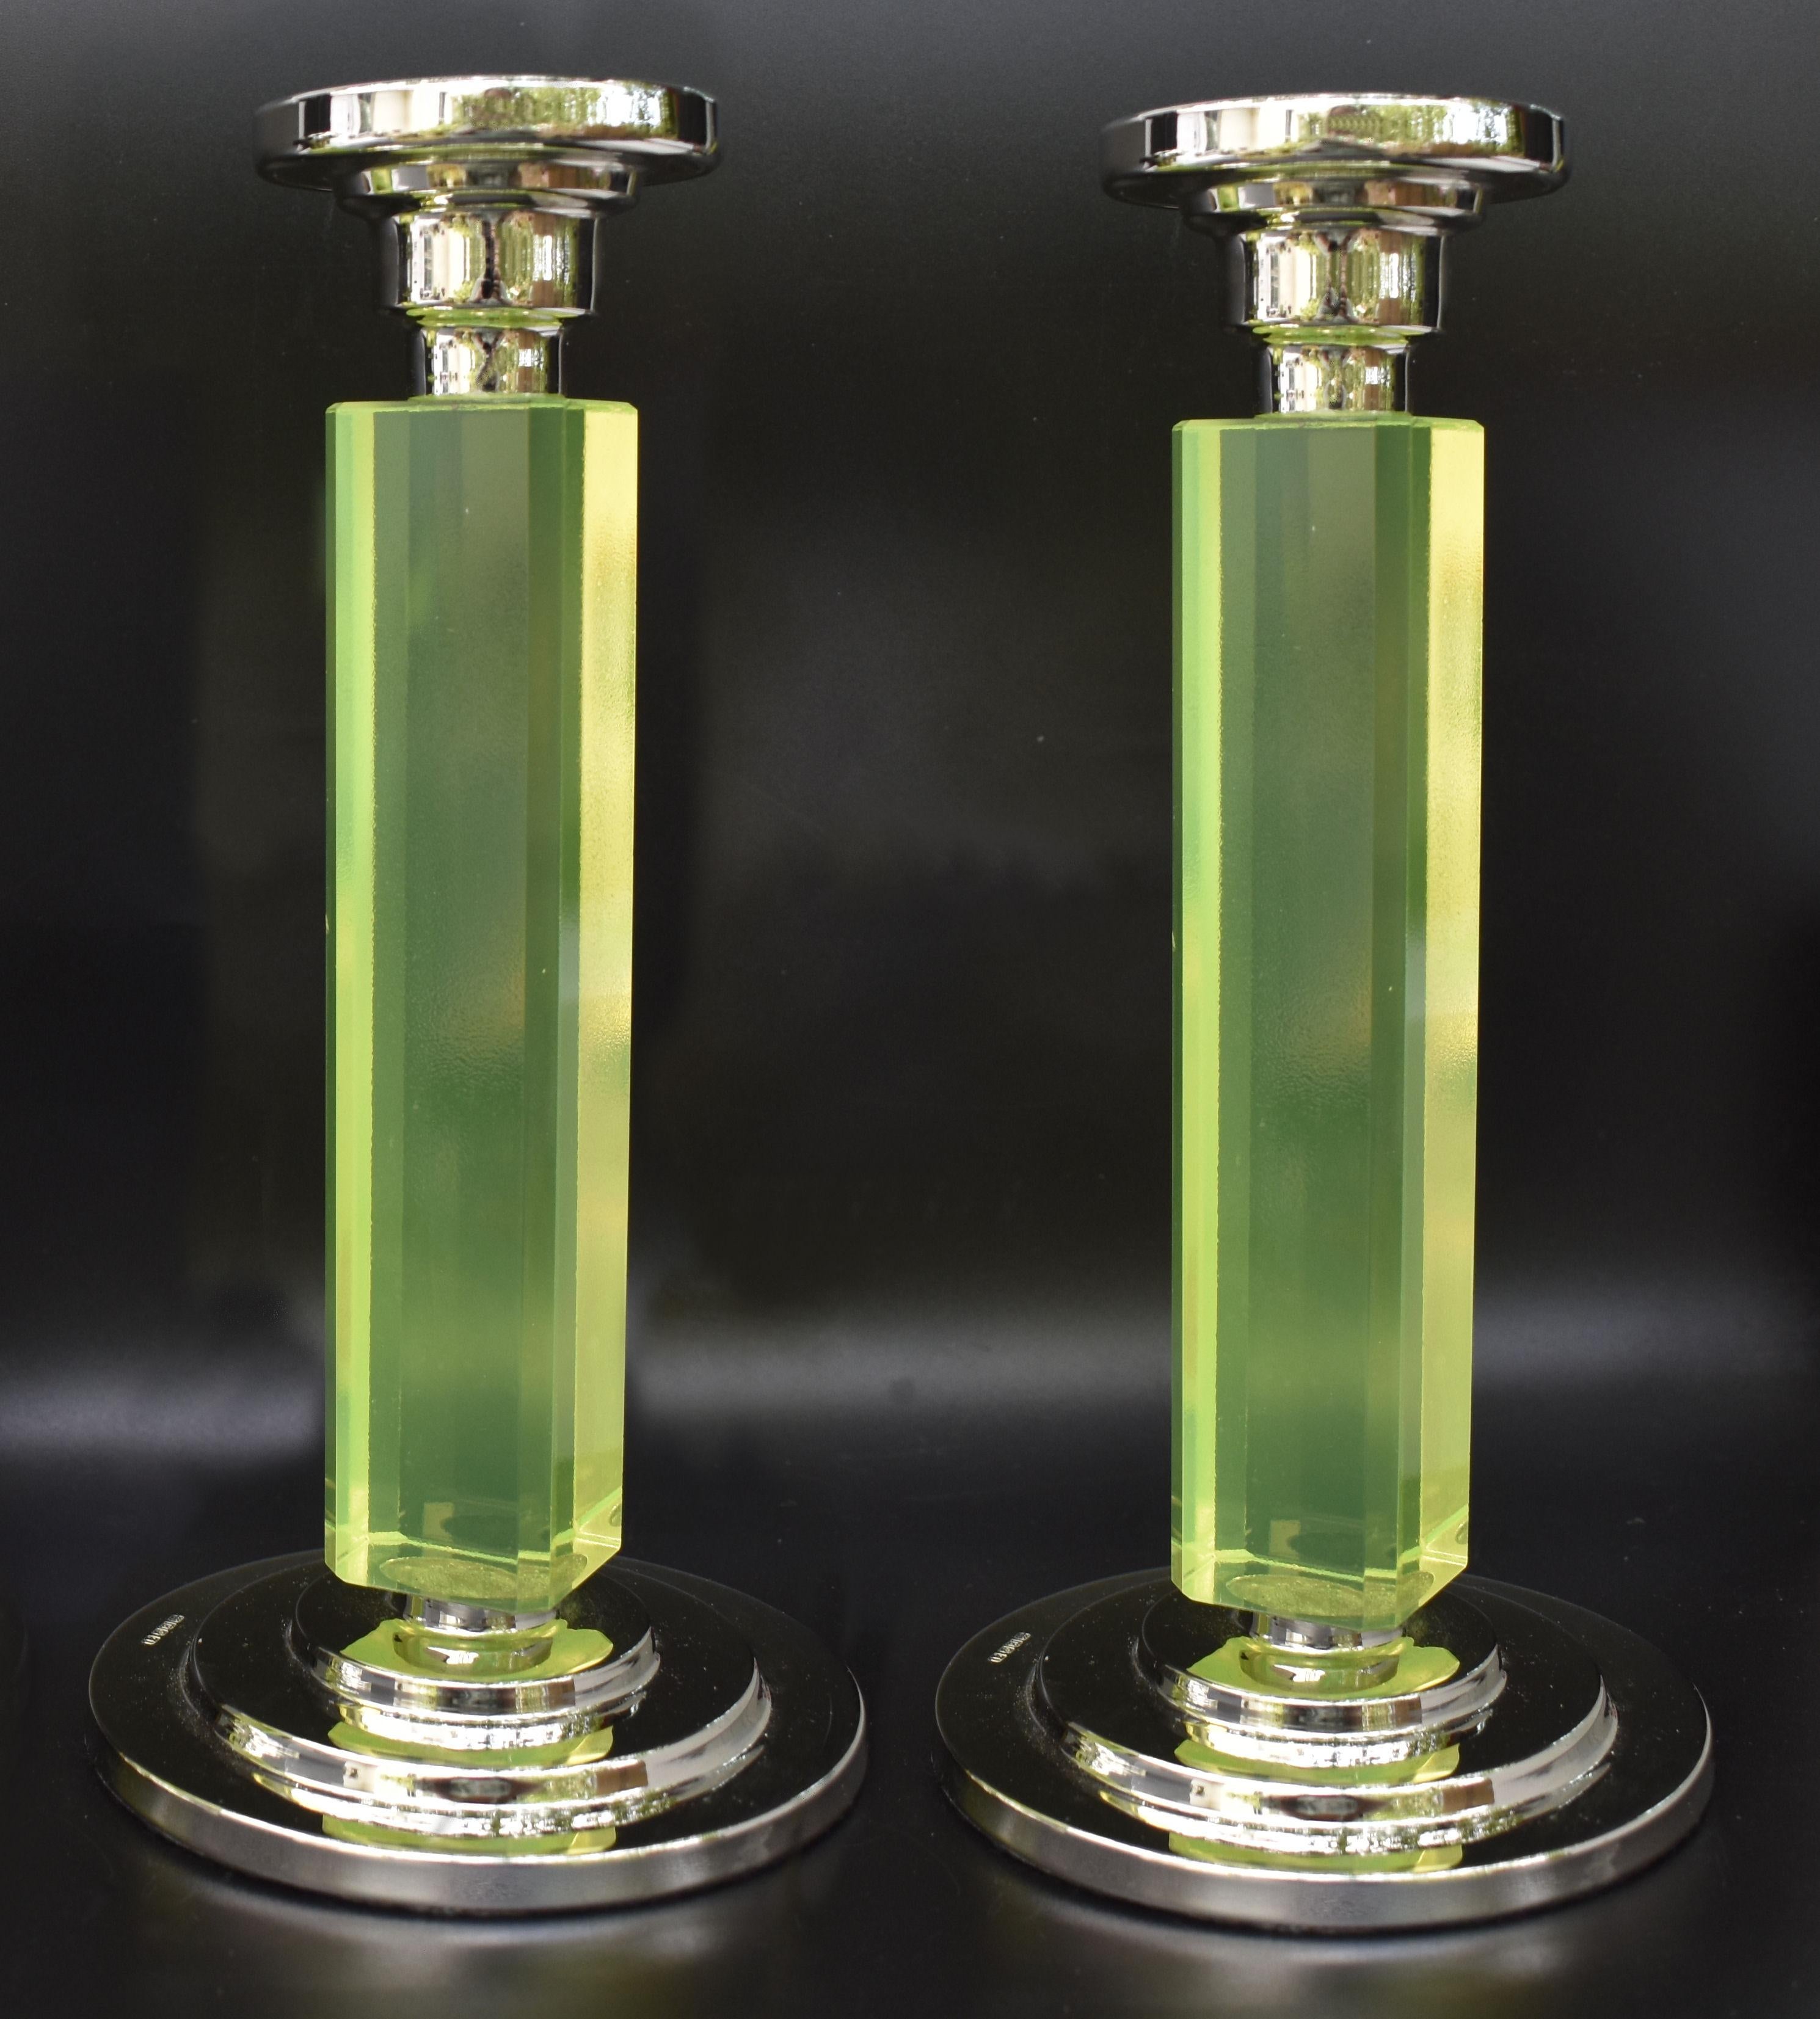 Superbly stylish and good sized pair of matching 1930s Art Deco candlesticks. Hallmarked nickel-silver bases and with tall uranium glass columns. Lovely condition and one Art Deco admirers will appreciate. Felt bases have been added to the bottom of